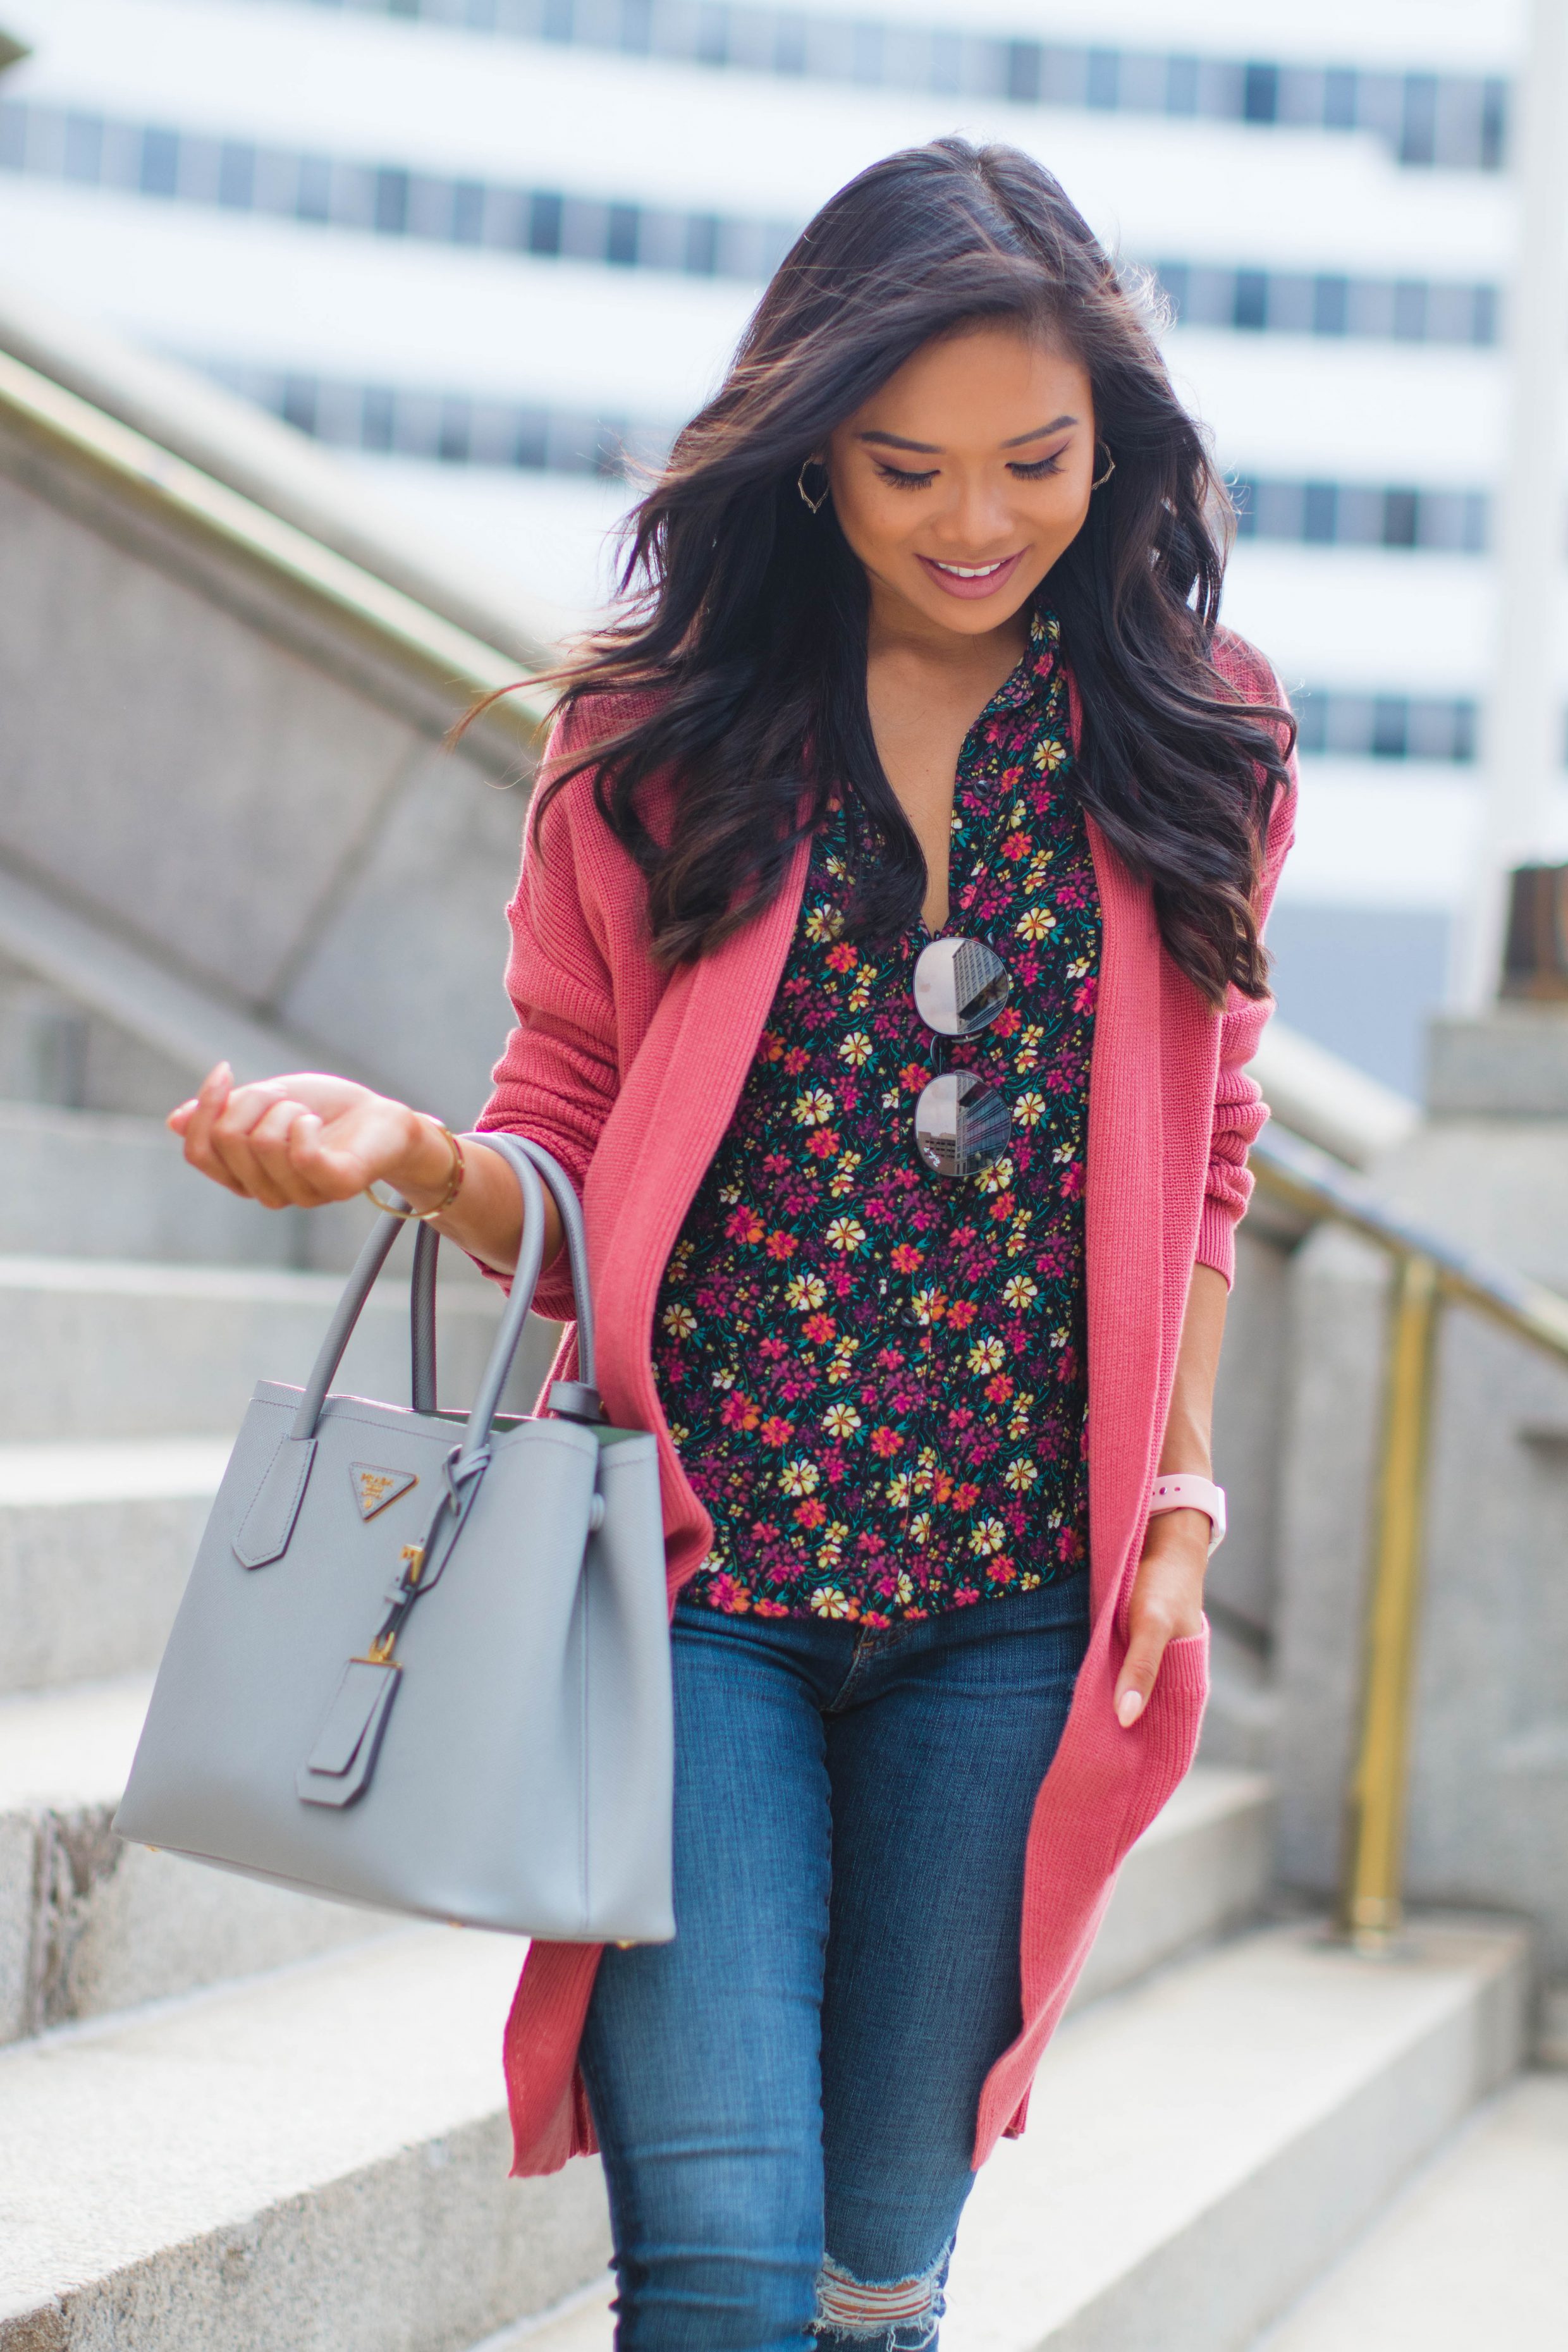 Norfolk fashion blogger Hoang-Kim wears a fall outfit idea with a floral blouse and cardigan